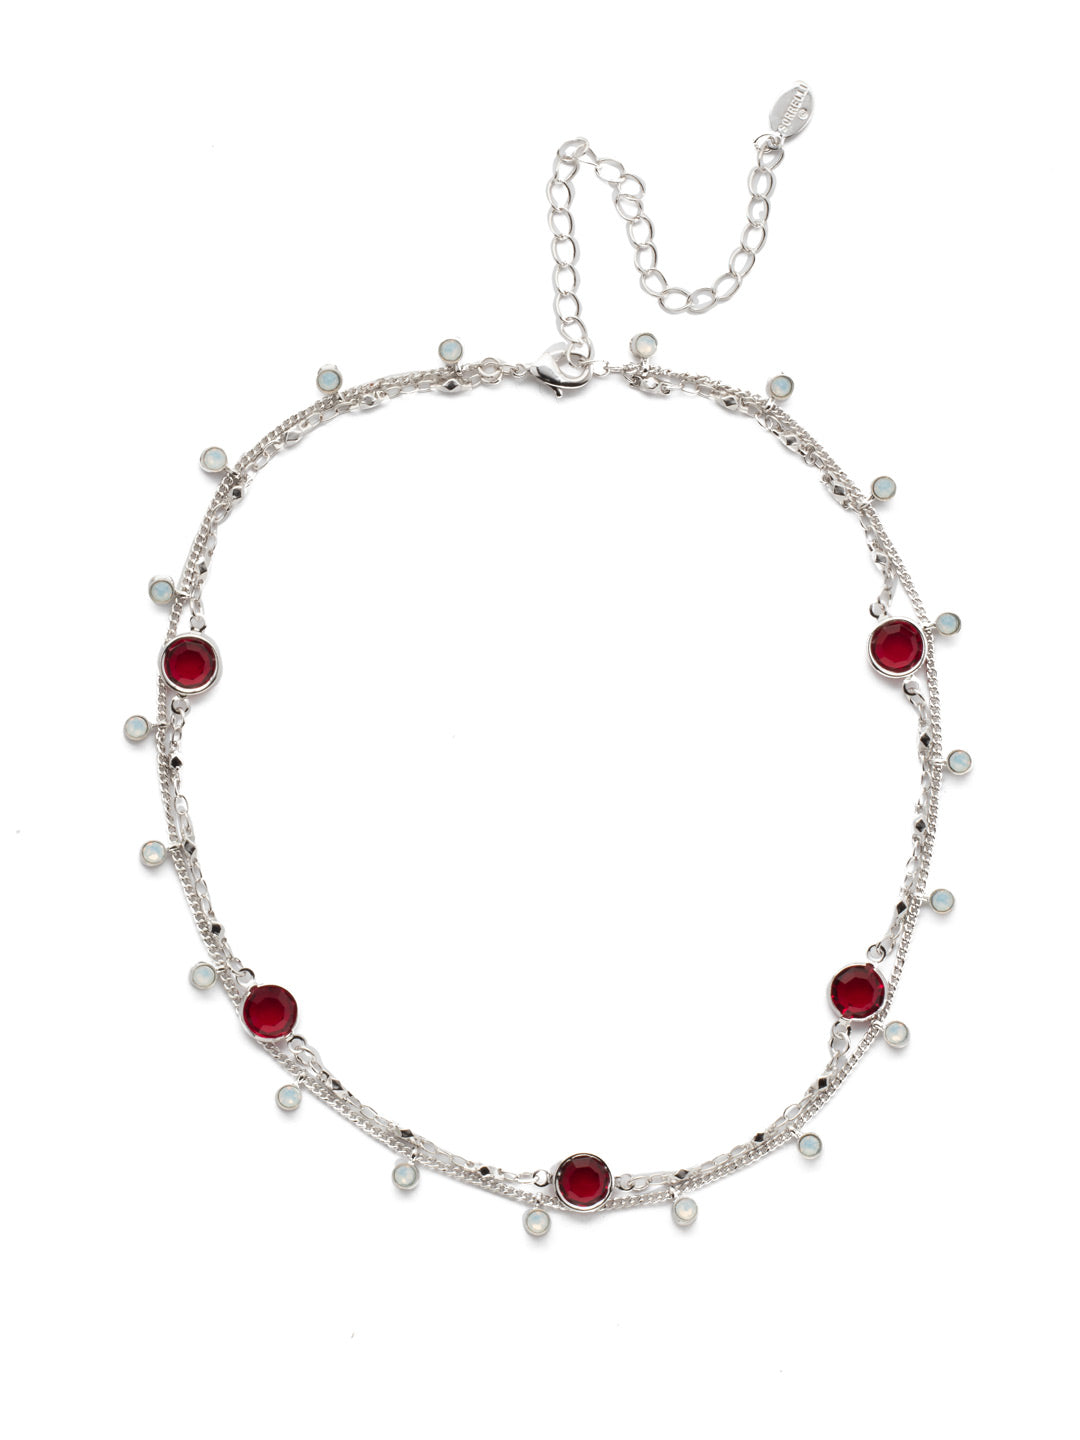 Dewdrop Layered Necklace - NEK36RHCP - Delicate layers of chain drizzled with droplets of opaque crystals. A quick and easy solution for a layered look with one piece. From Sorrelli's Crimson Pride collection in our Palladium Silver-tone finish.